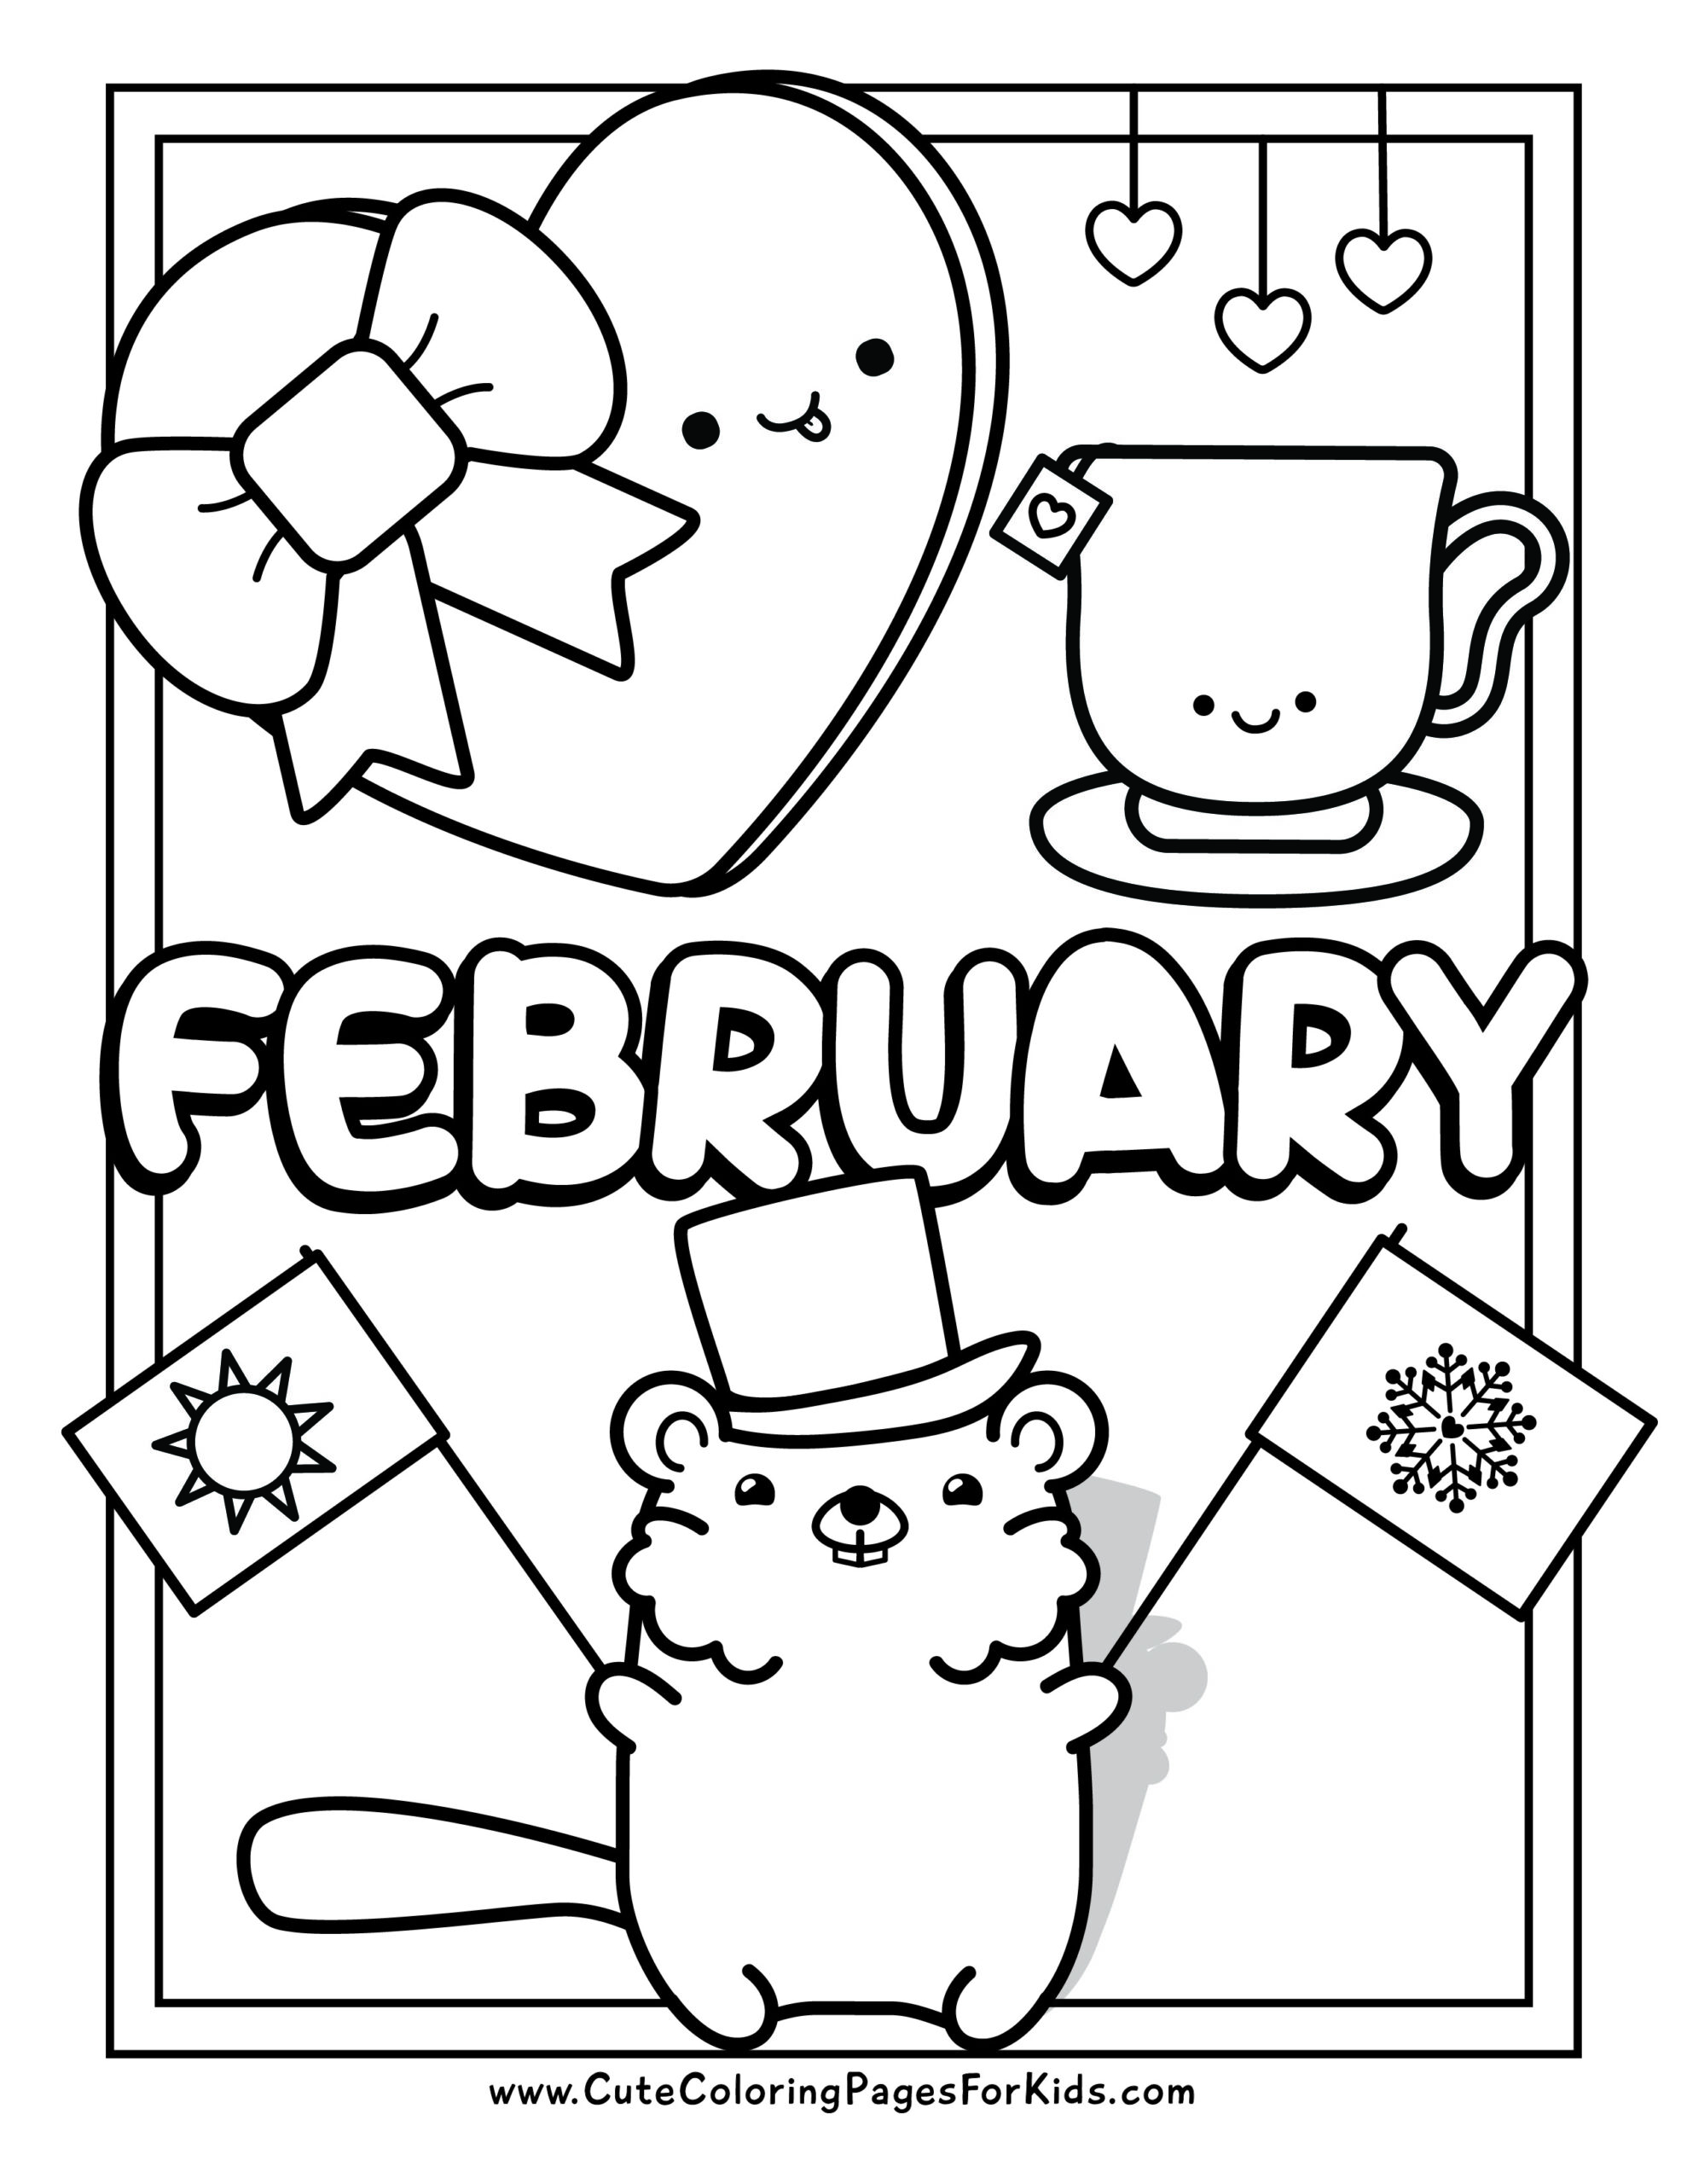 February coloring pages